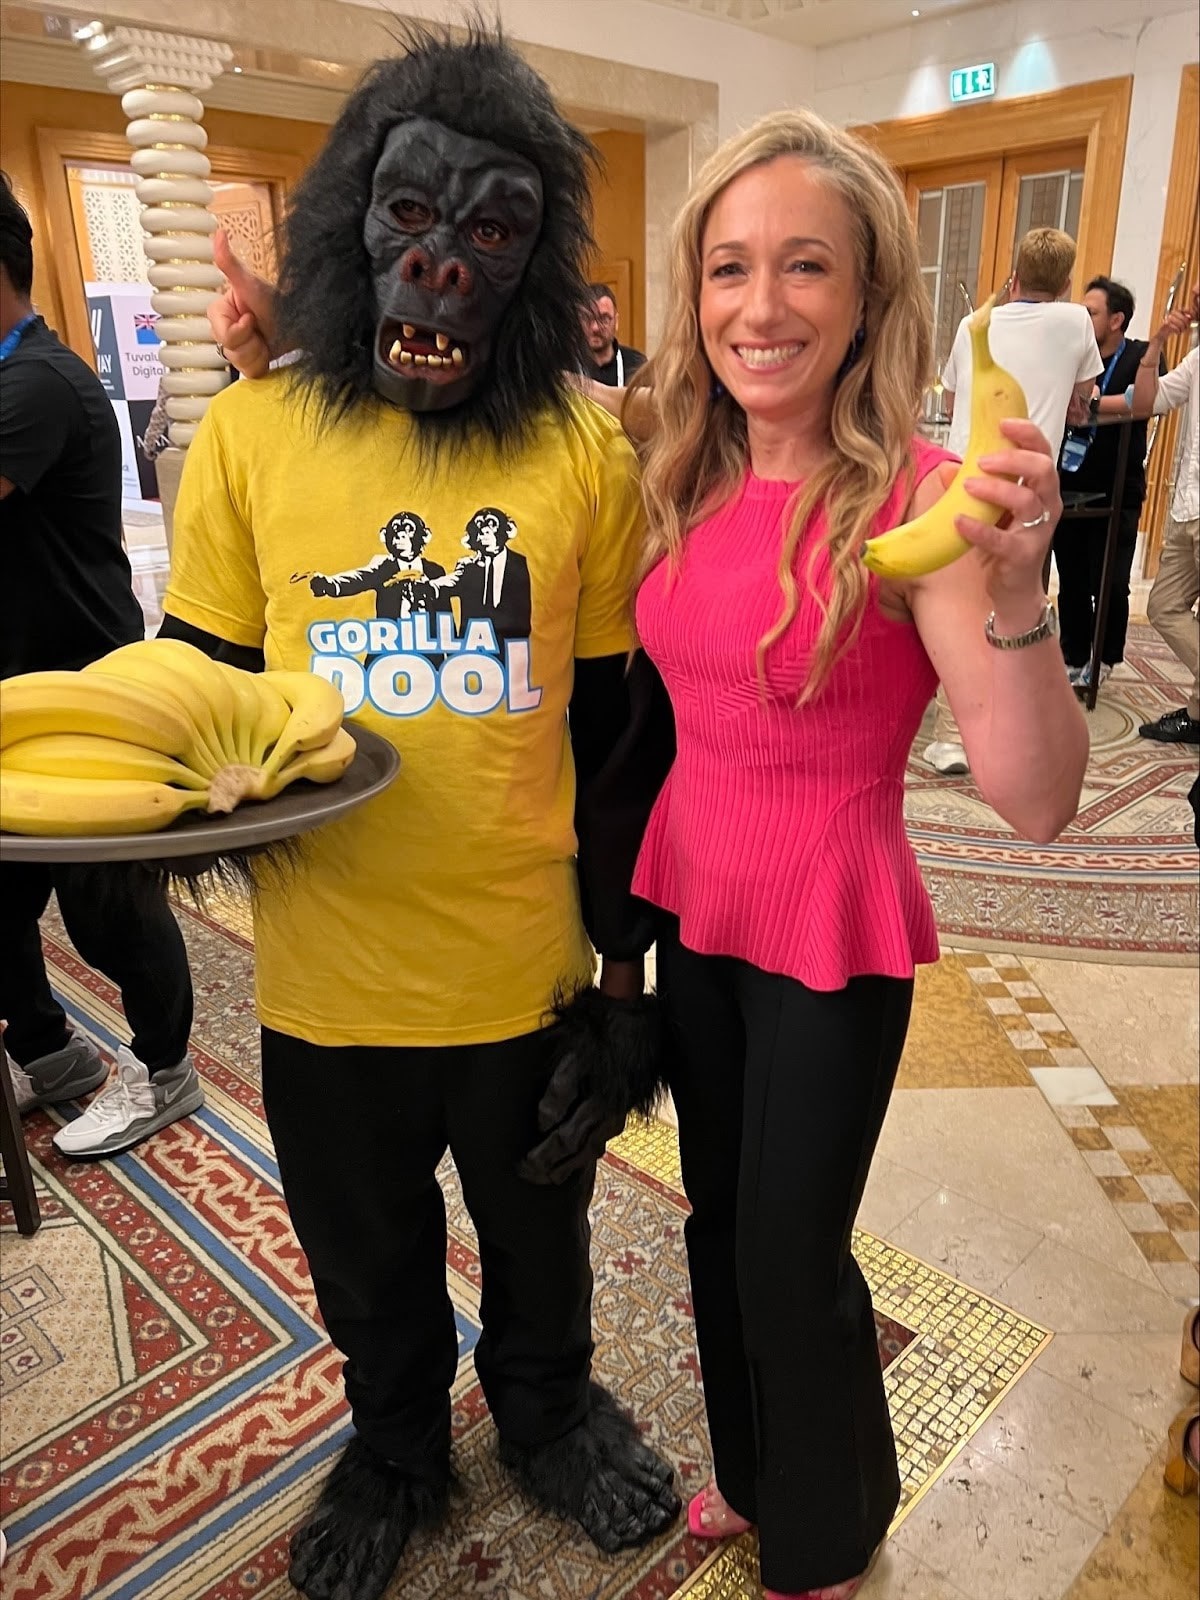 a mascot to hand out about 150 pounds of fresh bananas